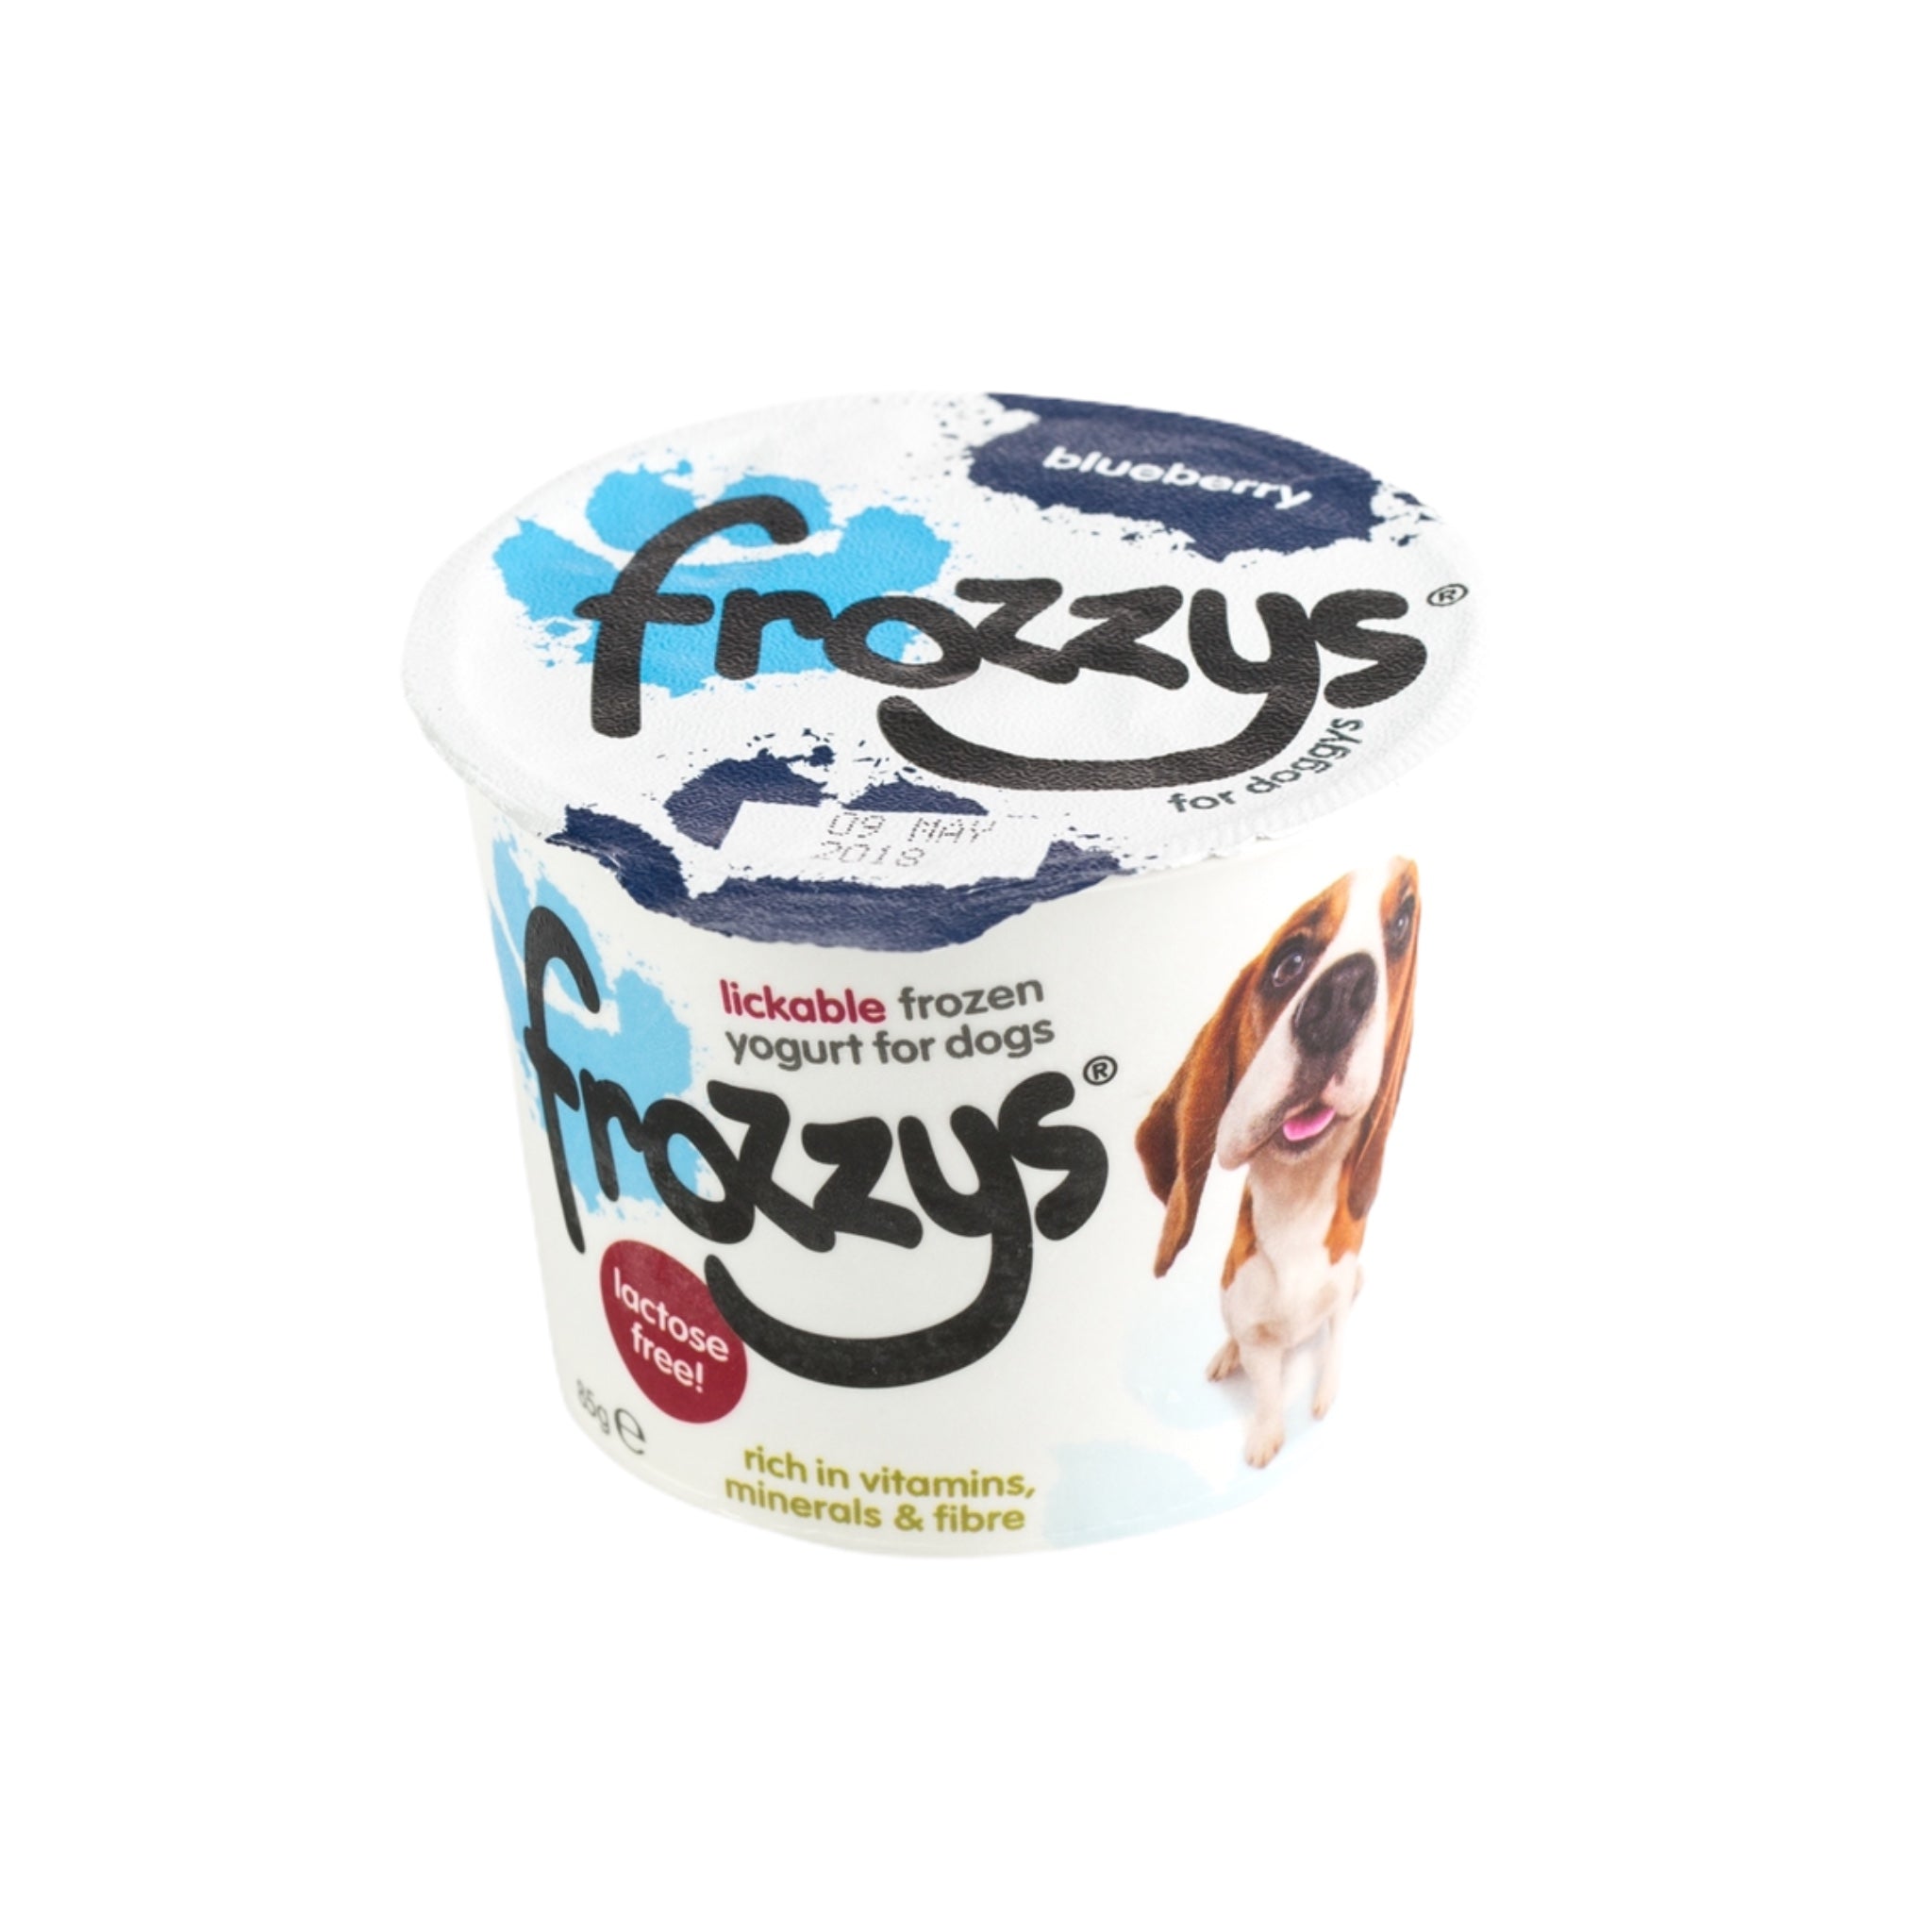 Blueberry Frozzy's